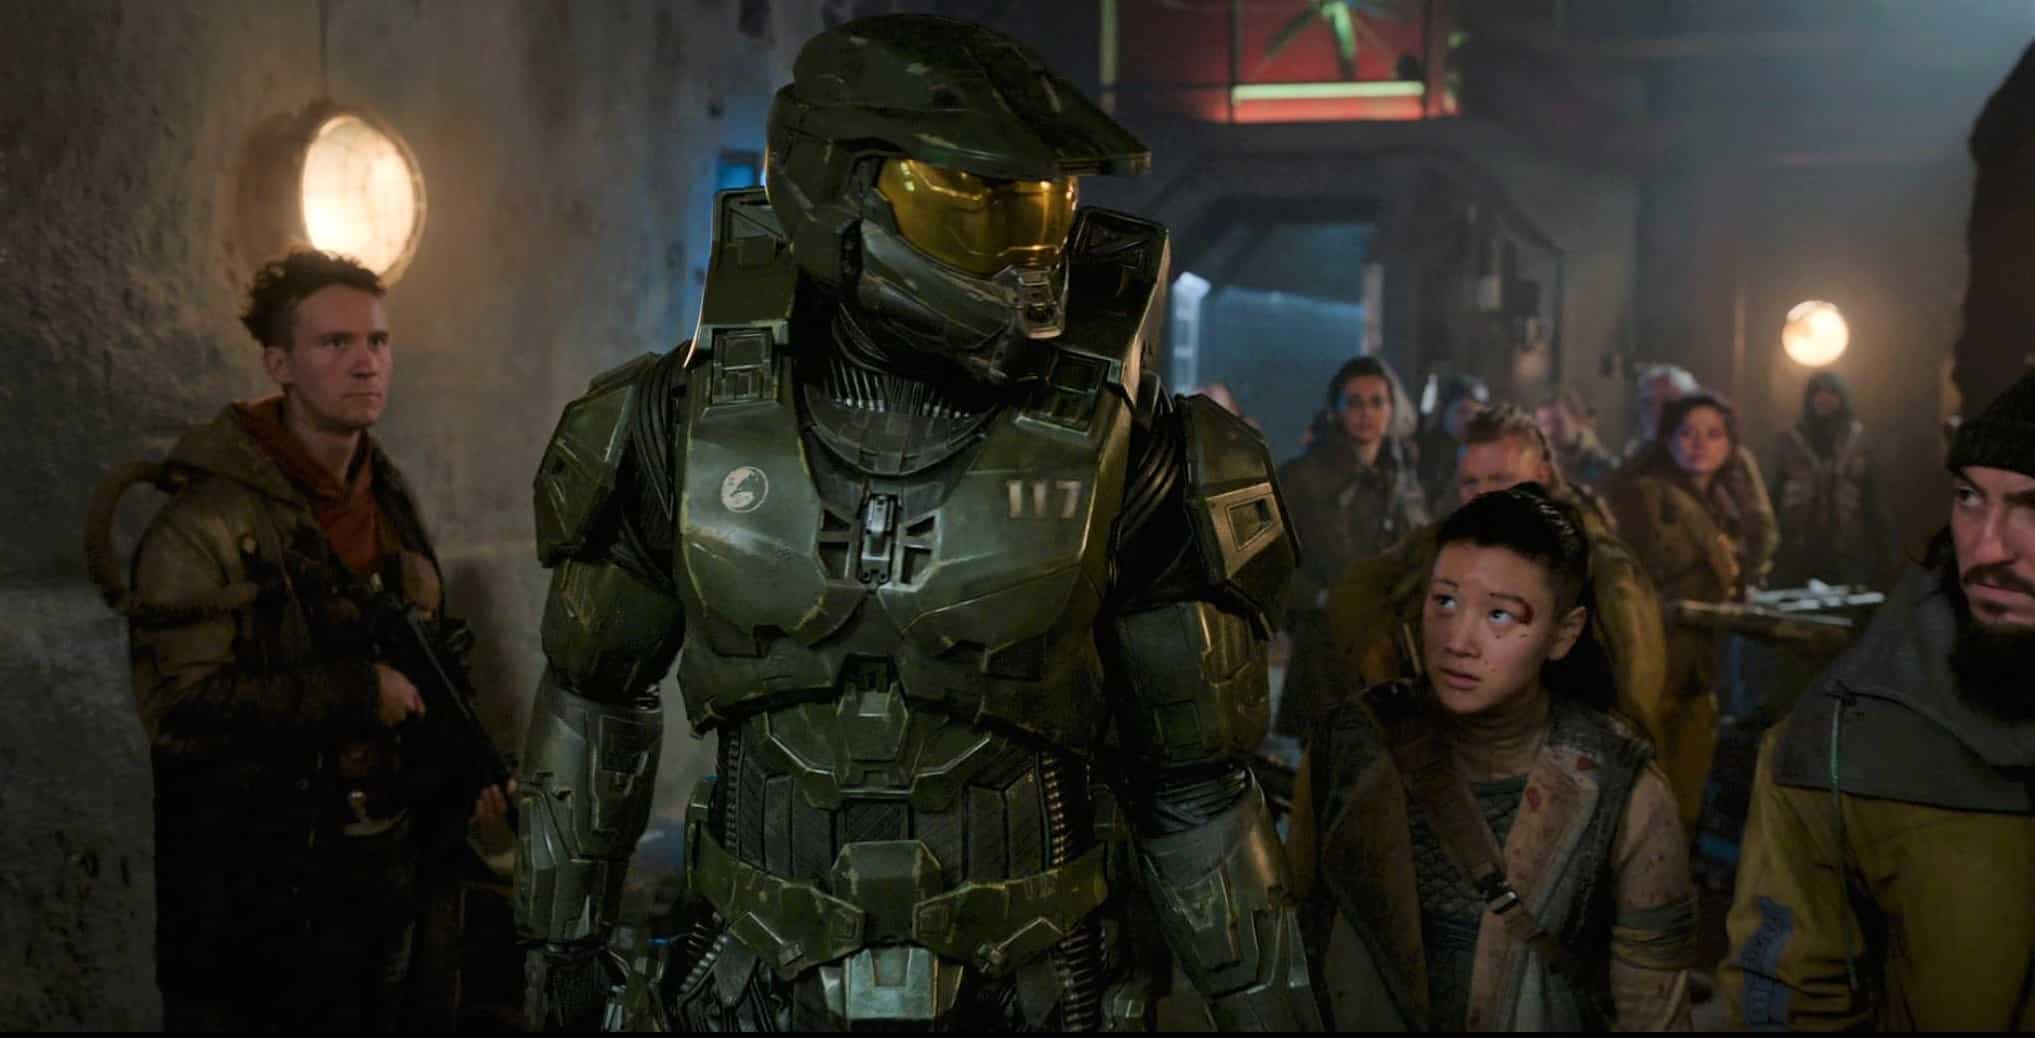 SPOILER Supposedly Leaked Screeenshots from the Halo TV Show